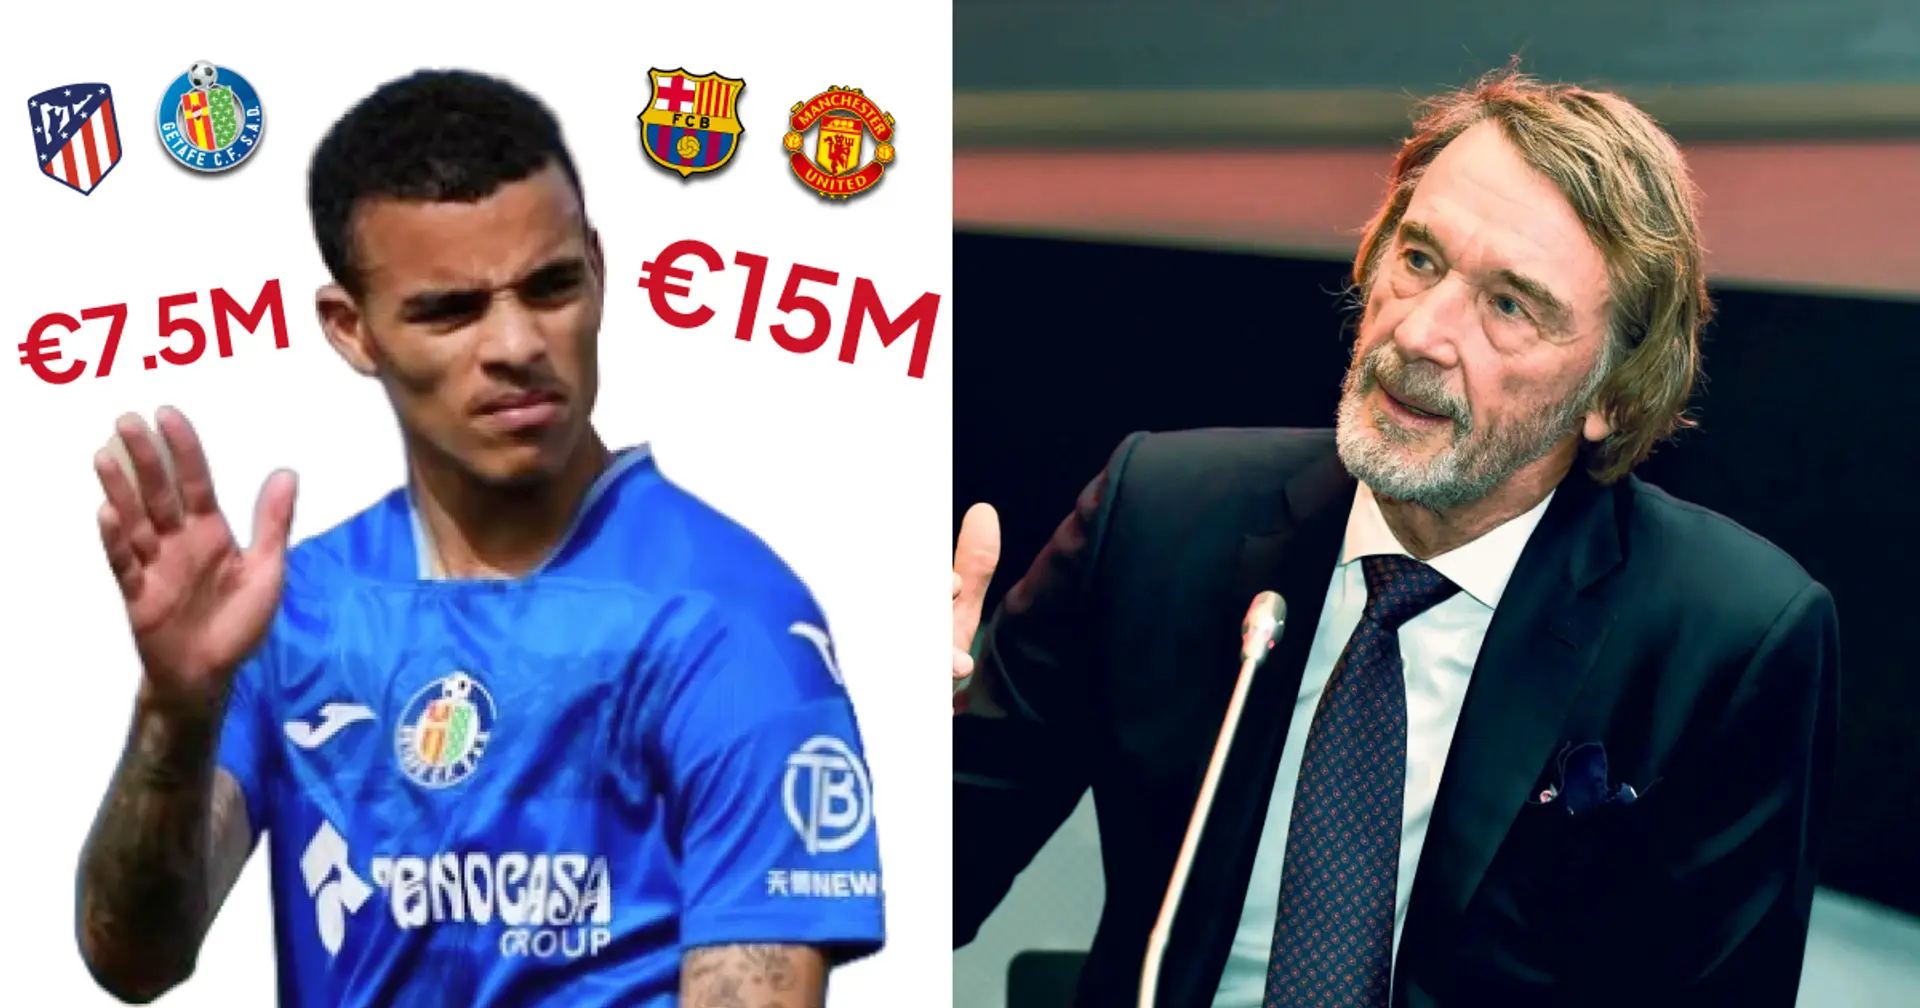 How much could Man United realistically get for Mason Greenwood